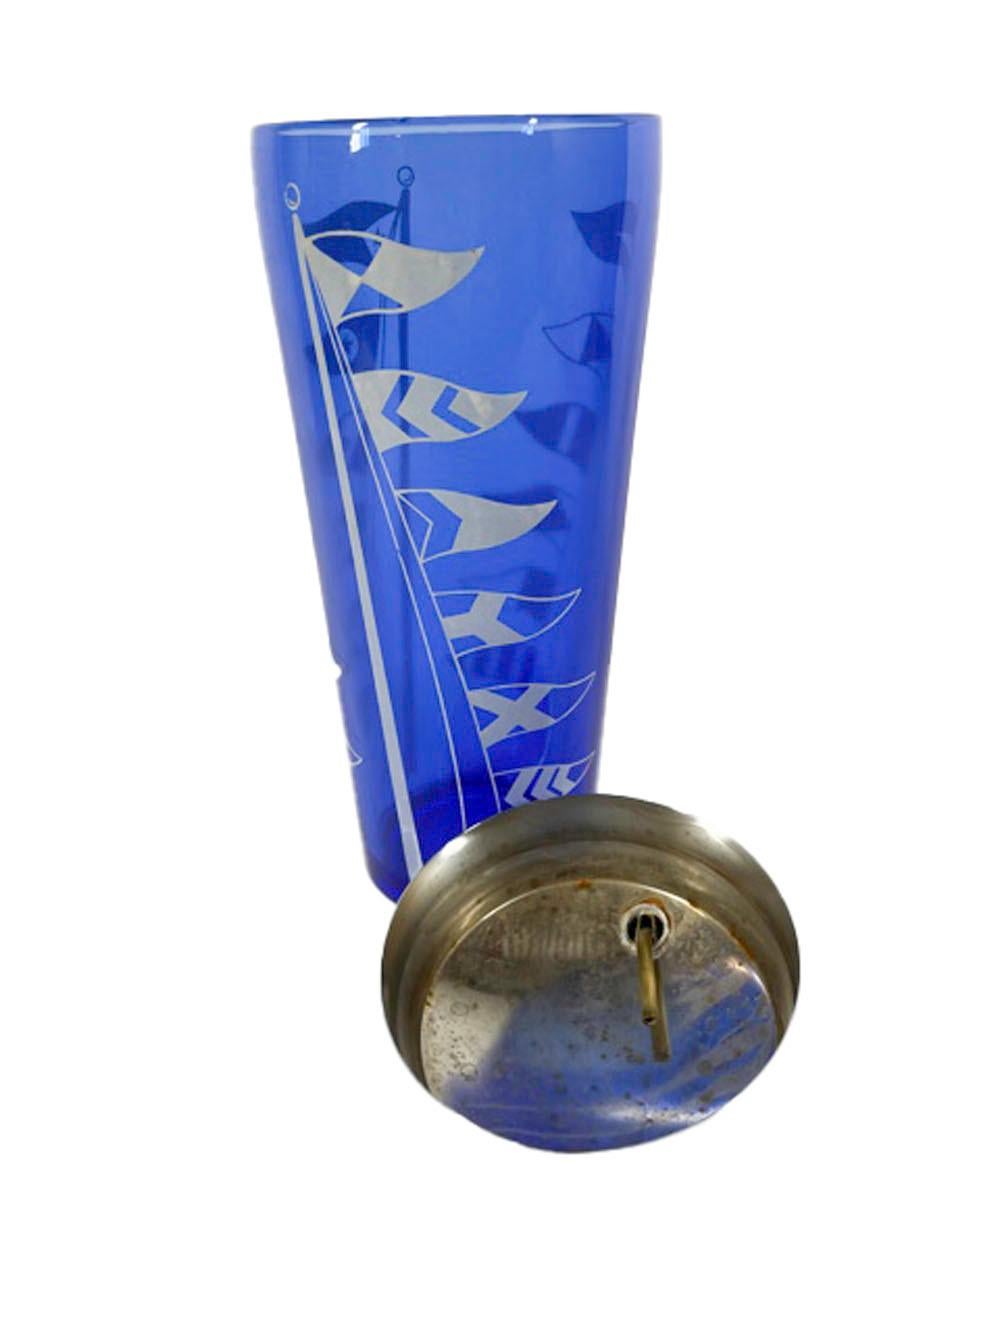 Art Deco Hazel-Atlas Cobalt Blue Cocktail Shaker with White Nautical Flags In Good Condition For Sale In Nantucket, MA